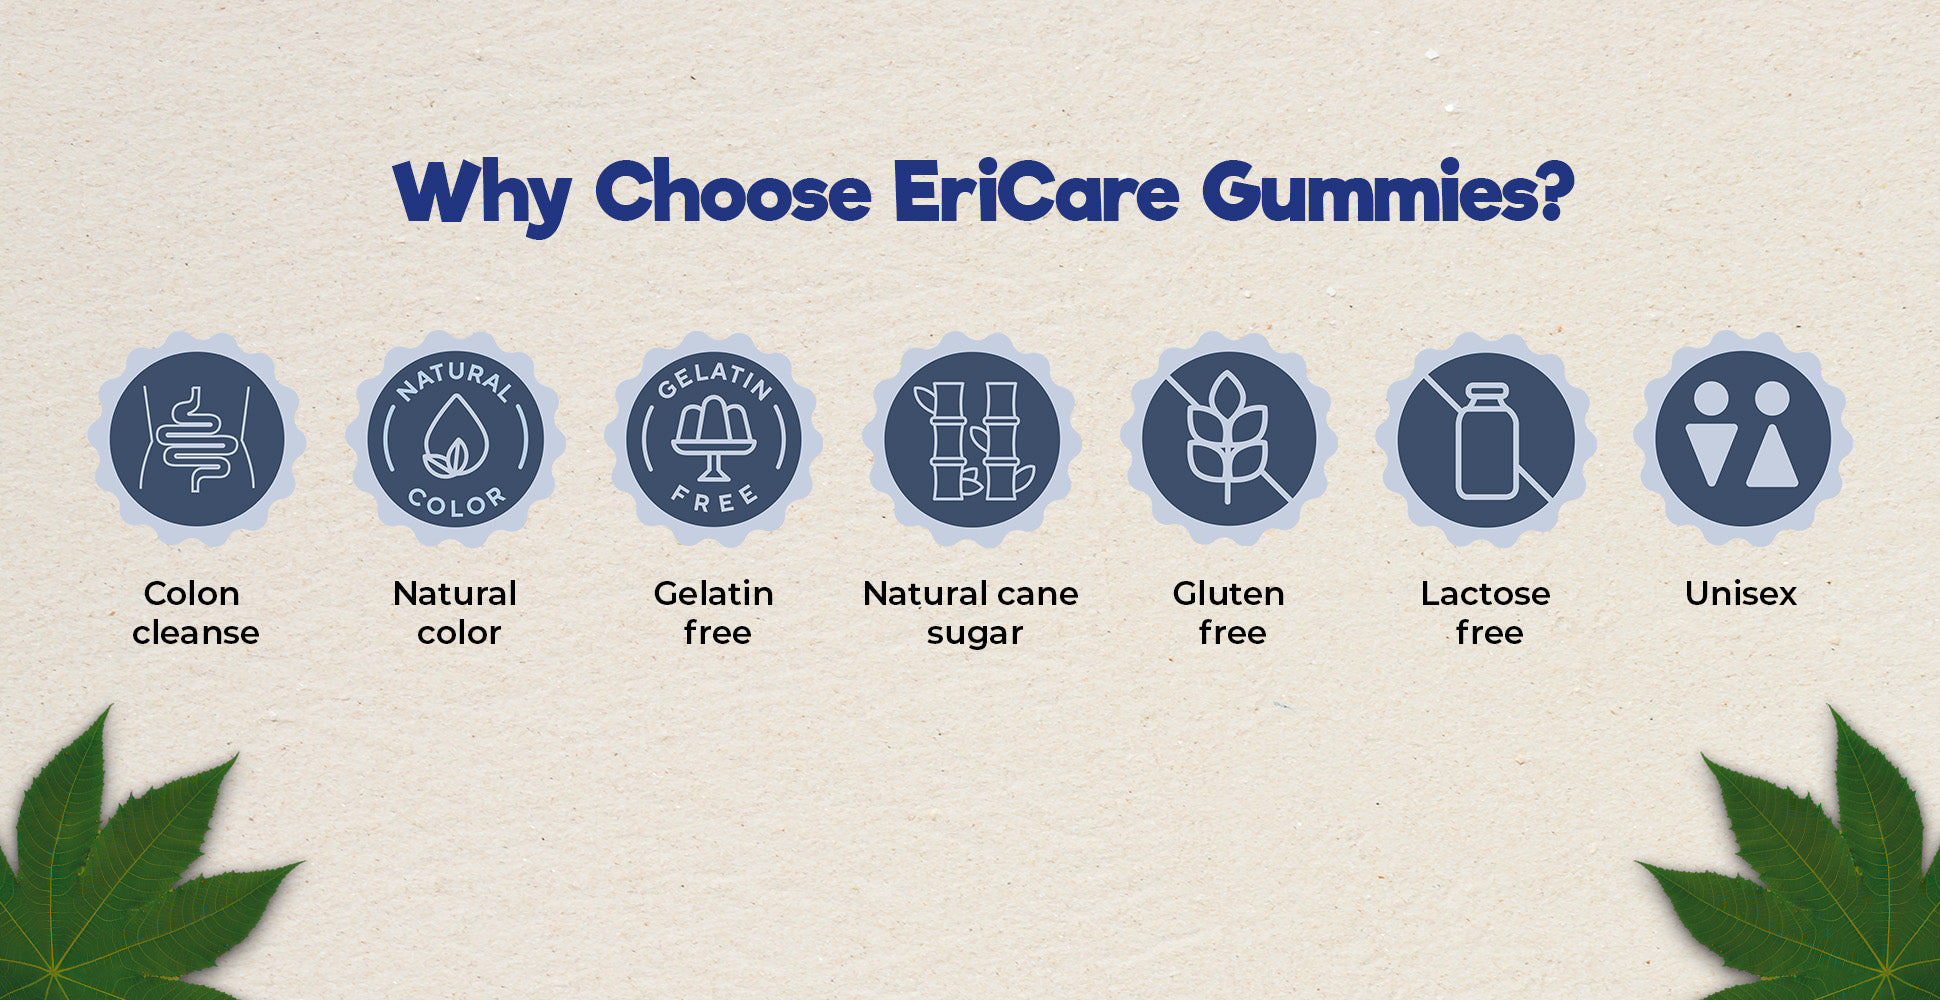 Why choose EriCare Colon cleanse gummies over drinking castor oil